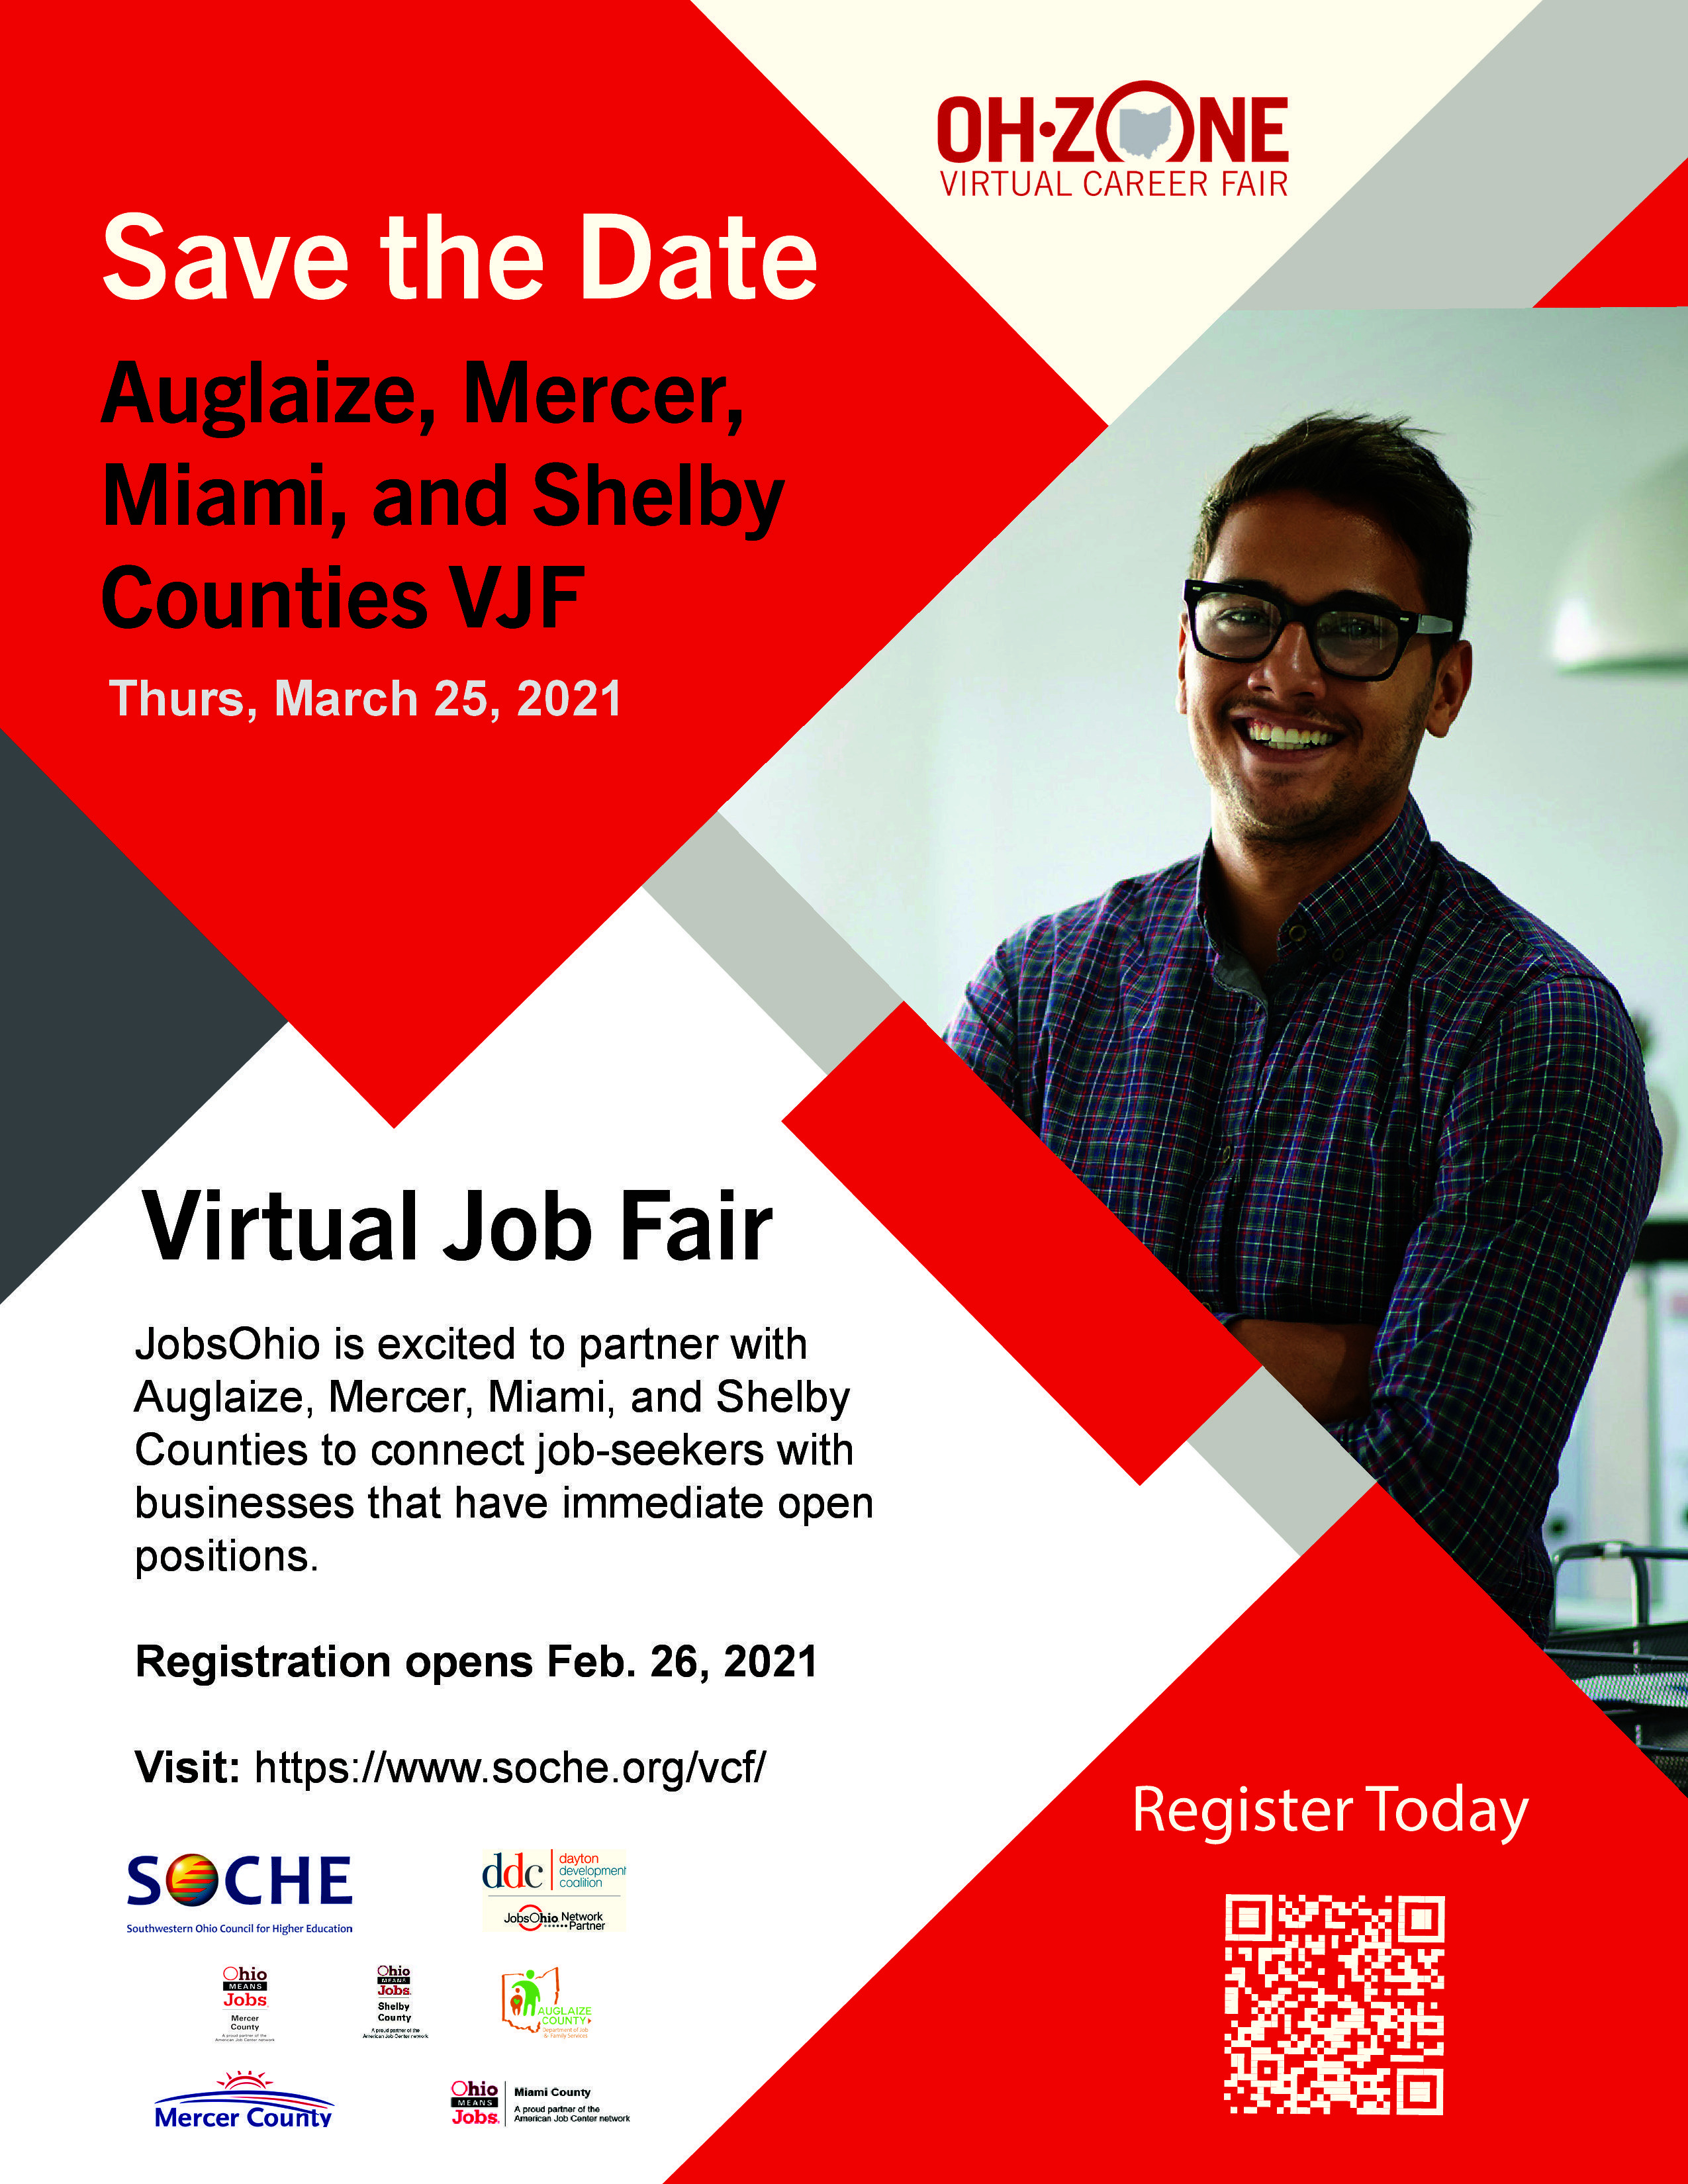  OH-Zone Virtual Career Fair: Featured Image 1 